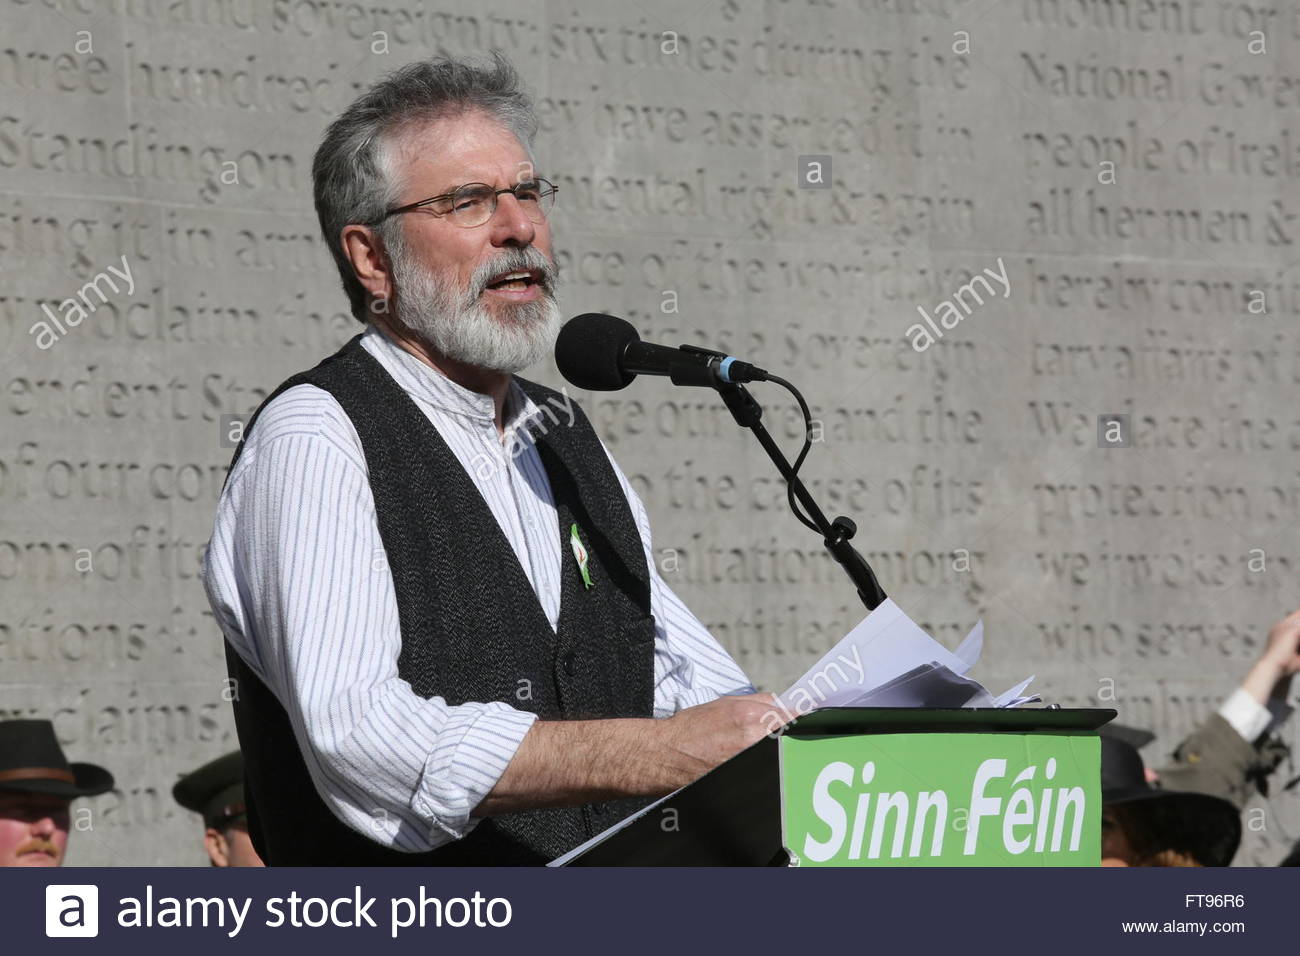 Dublin, Ireland. 25th March, 2016. Gerry Adams speaking in Dublin today at a 1916 centenary event. Credit:  reallifephotos/Alamy Live News Stock Photo